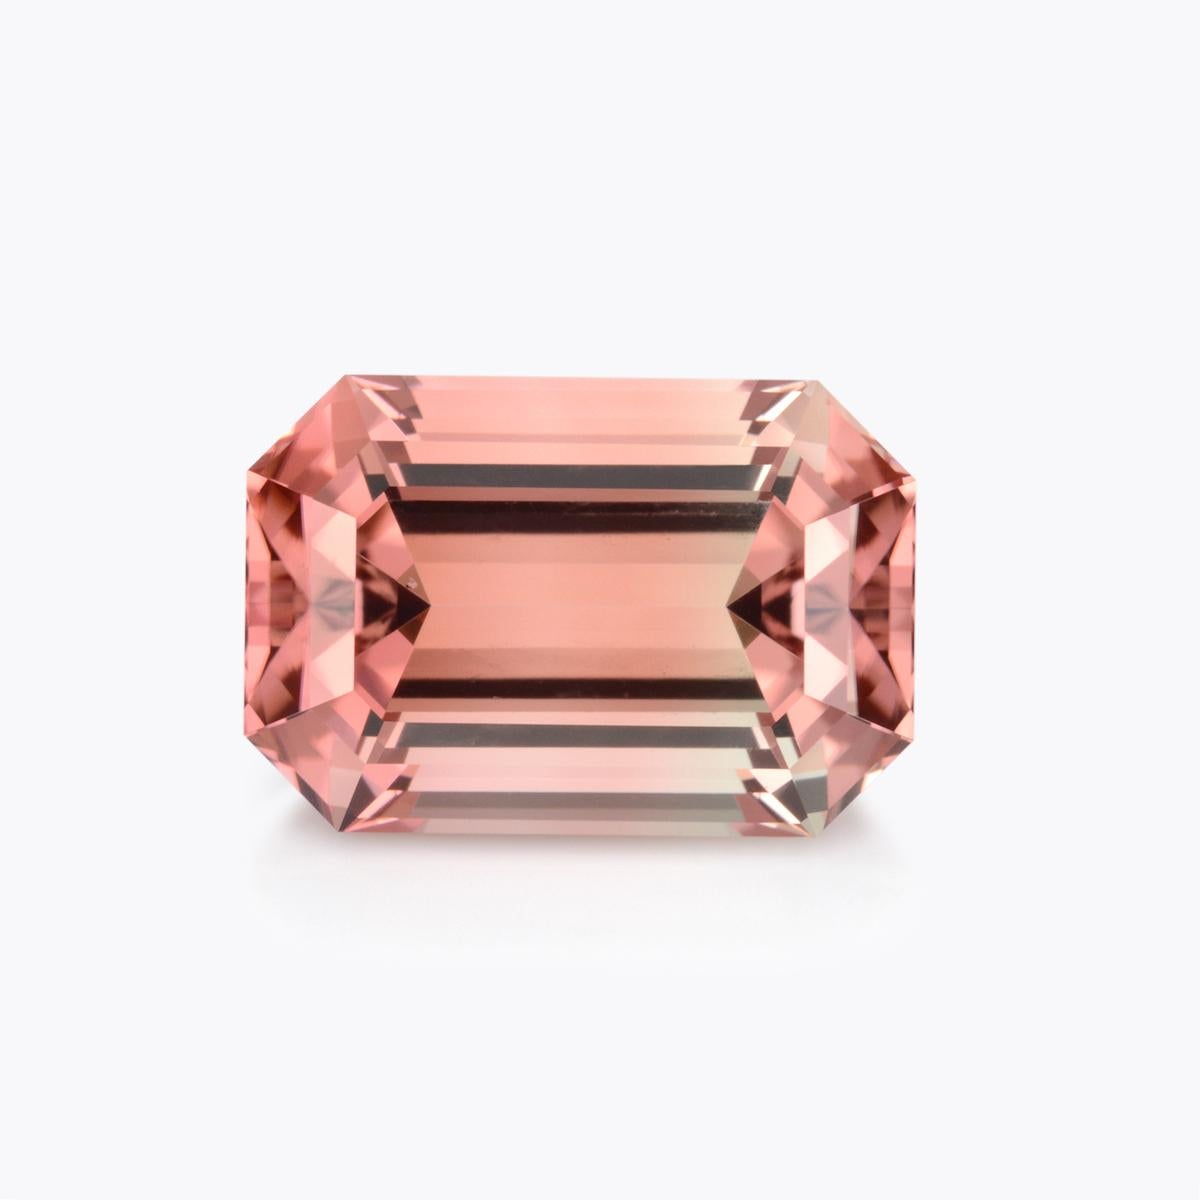 Unusual 5.07 carat Bicolor Pink Tourmaline Emerald-Cut loose gemstone, offered unmounted to a unique gemstone lover.
Dimensions: 12 x 8.2 x 6.5 mm.
Returns are accepted and paid by us within 7 days of delivery.
We offer supreme custom jewelry work